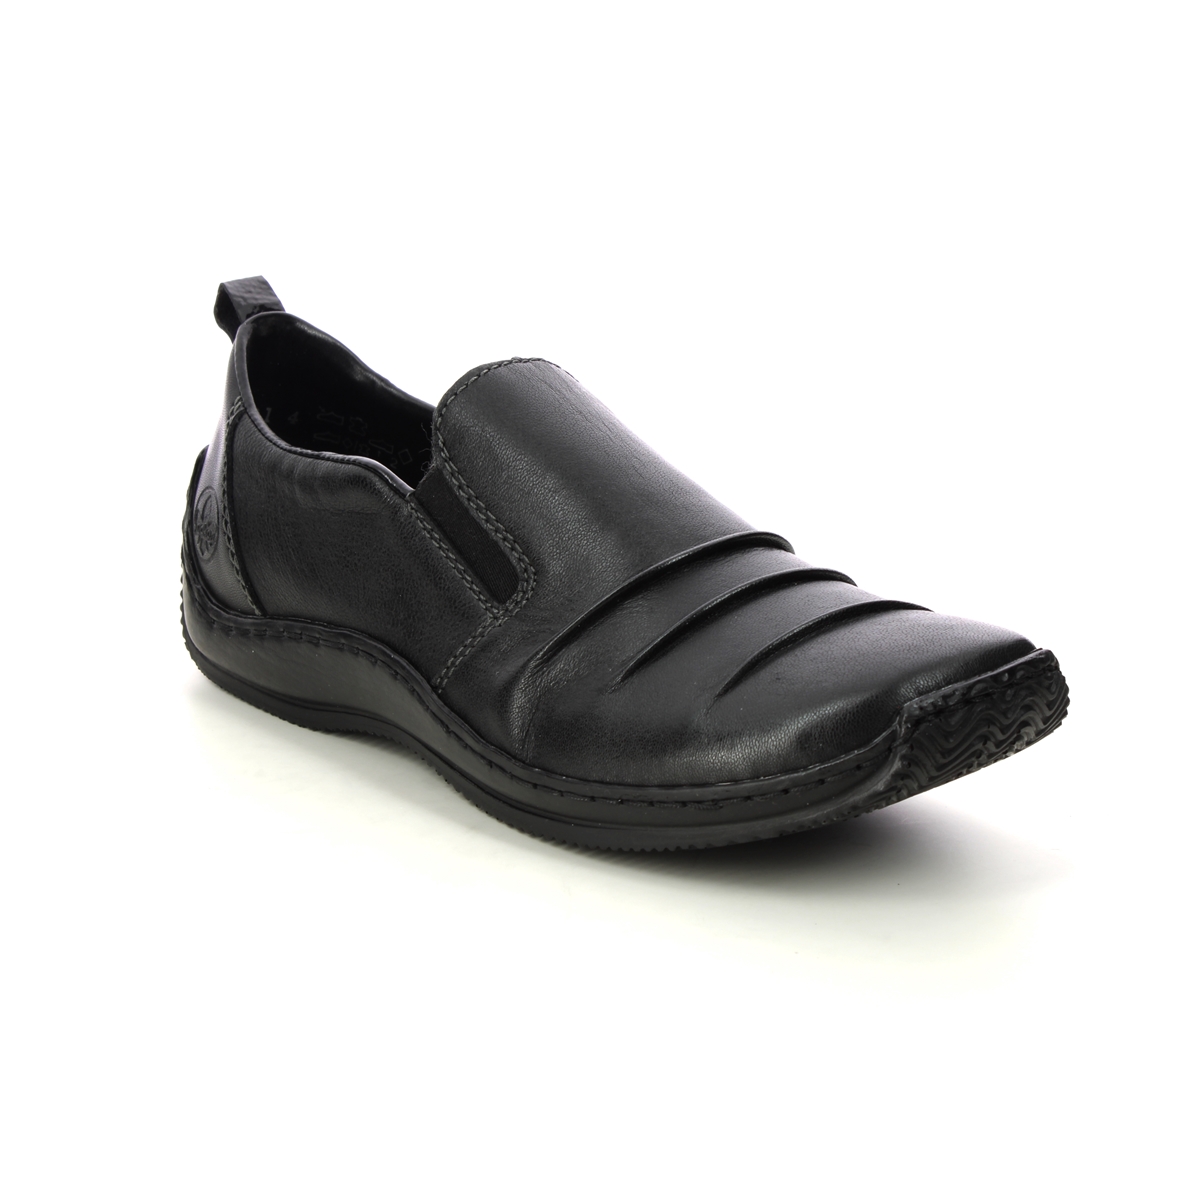 Rieker L1789-00 Black leather Womens Comfort Slip On Shoes in a Plain Leather in Size 42